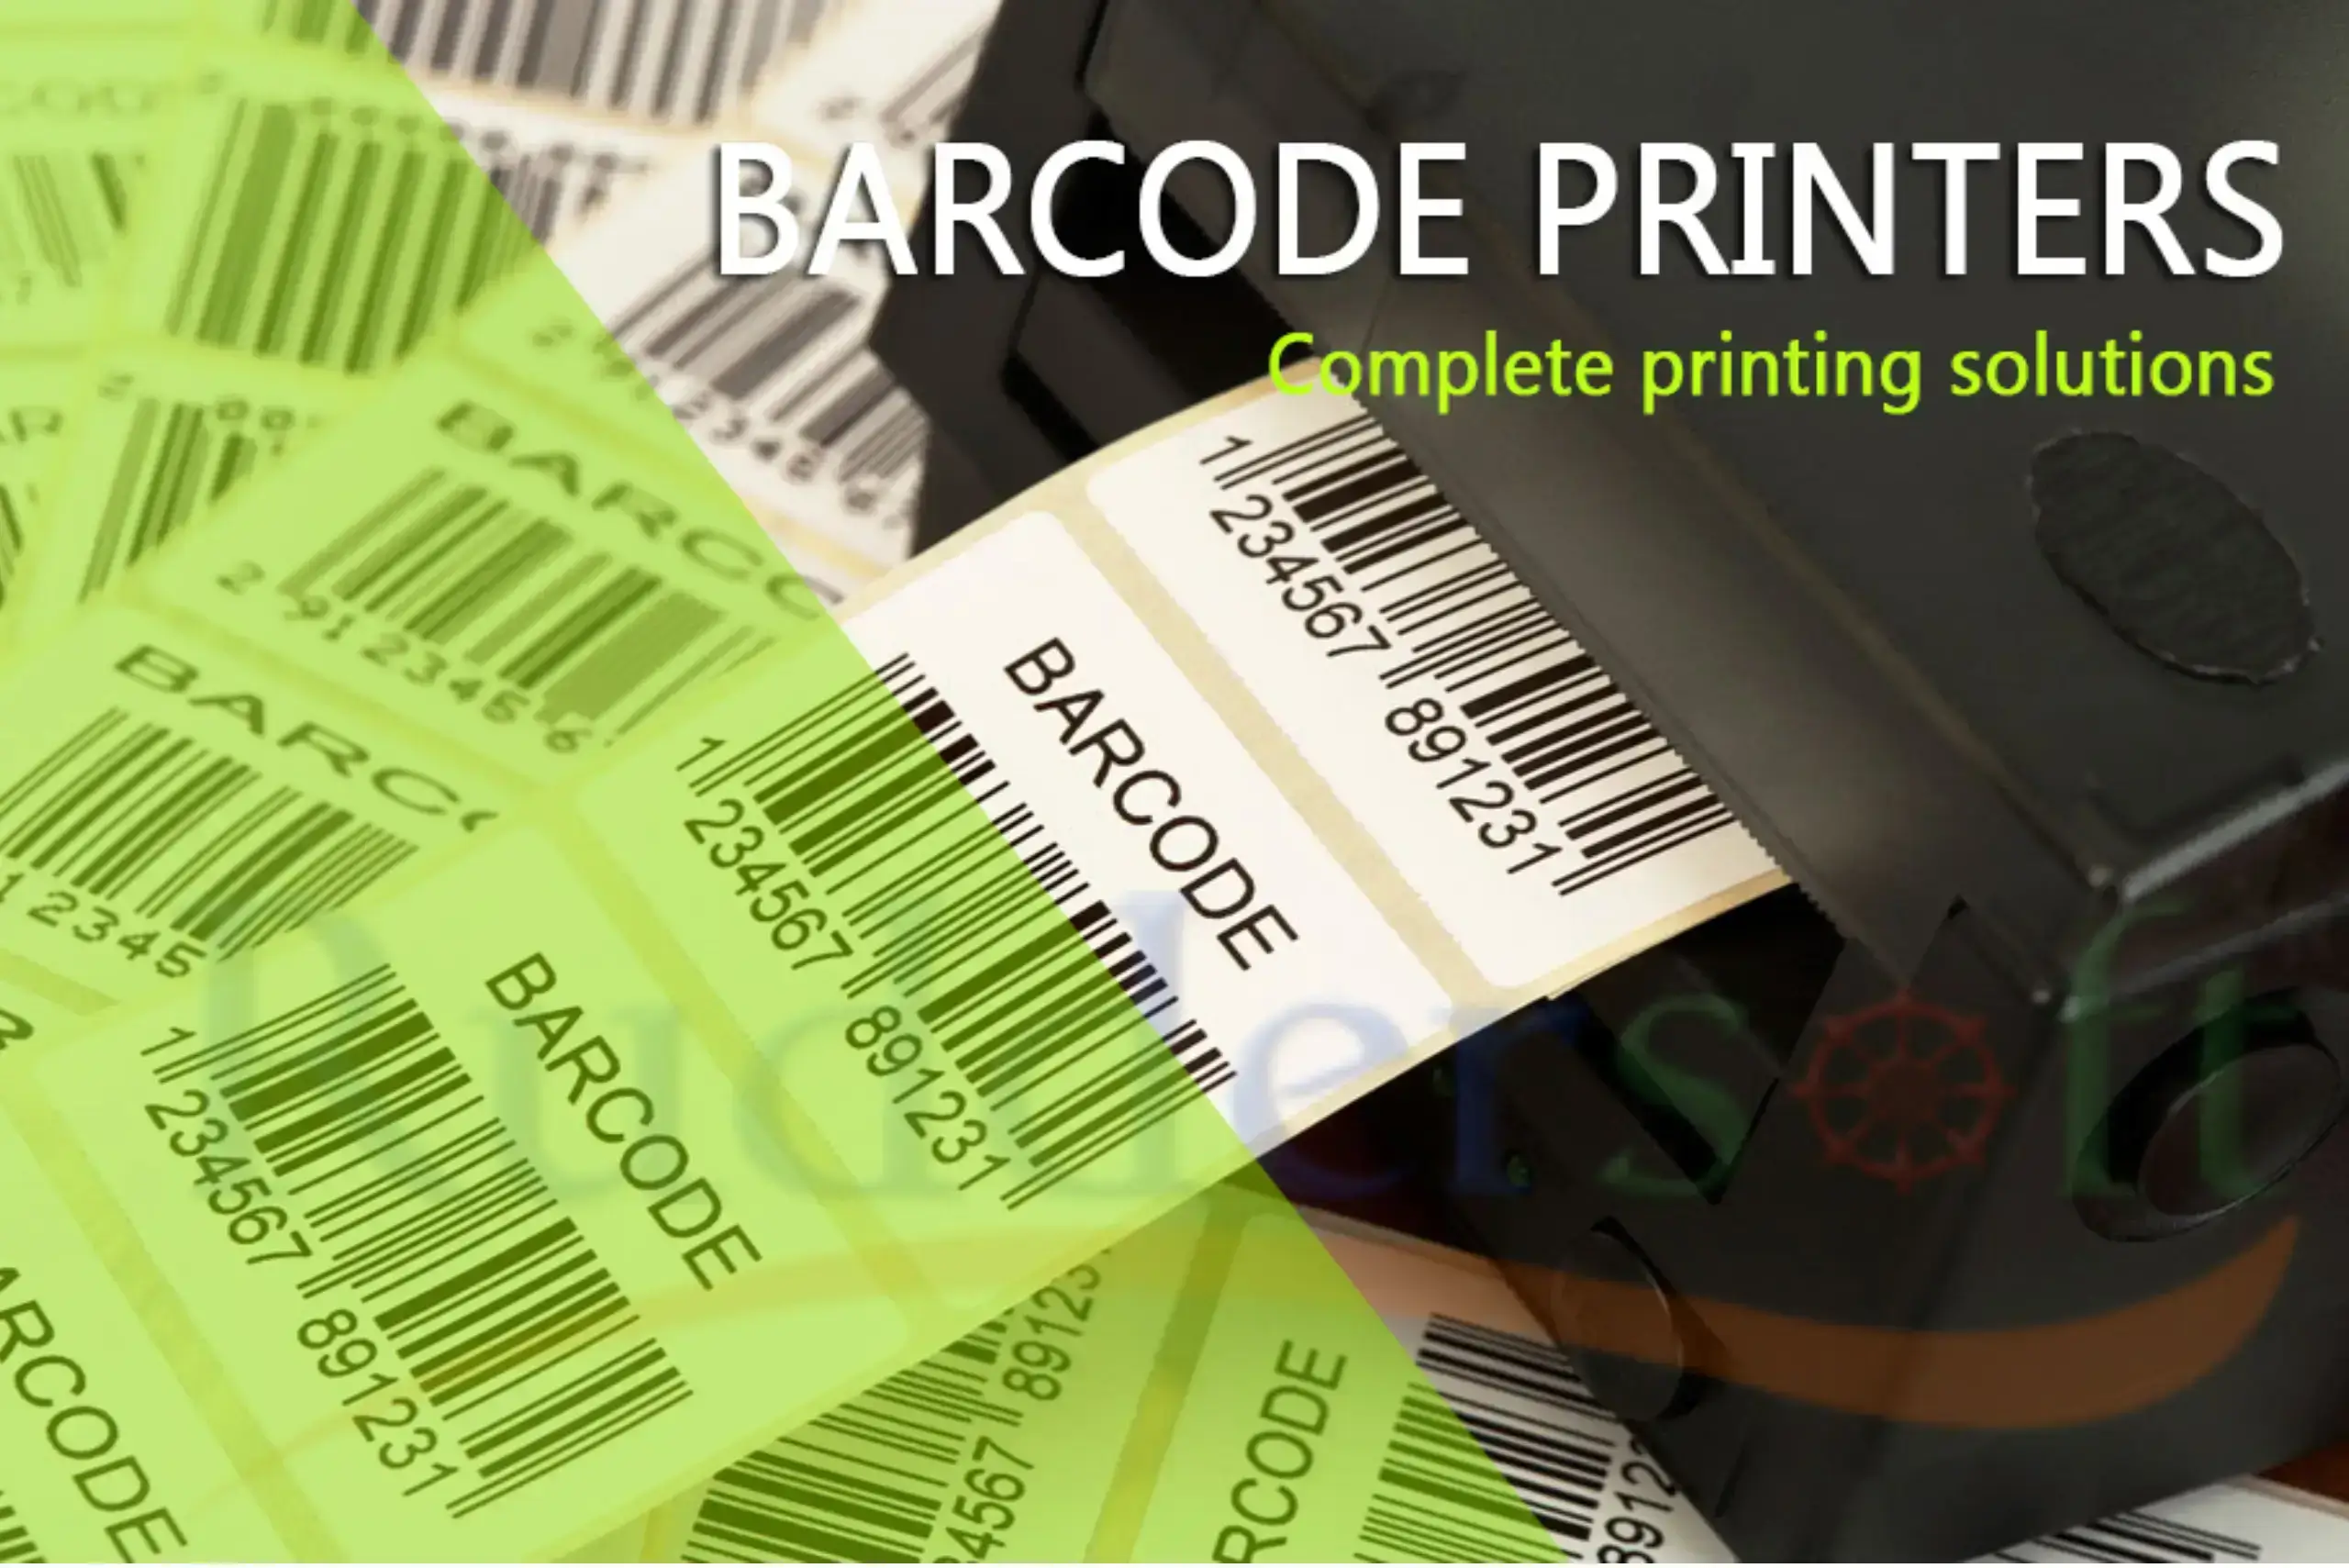 Barcode Printers: How To Make Right Choice For Your Business